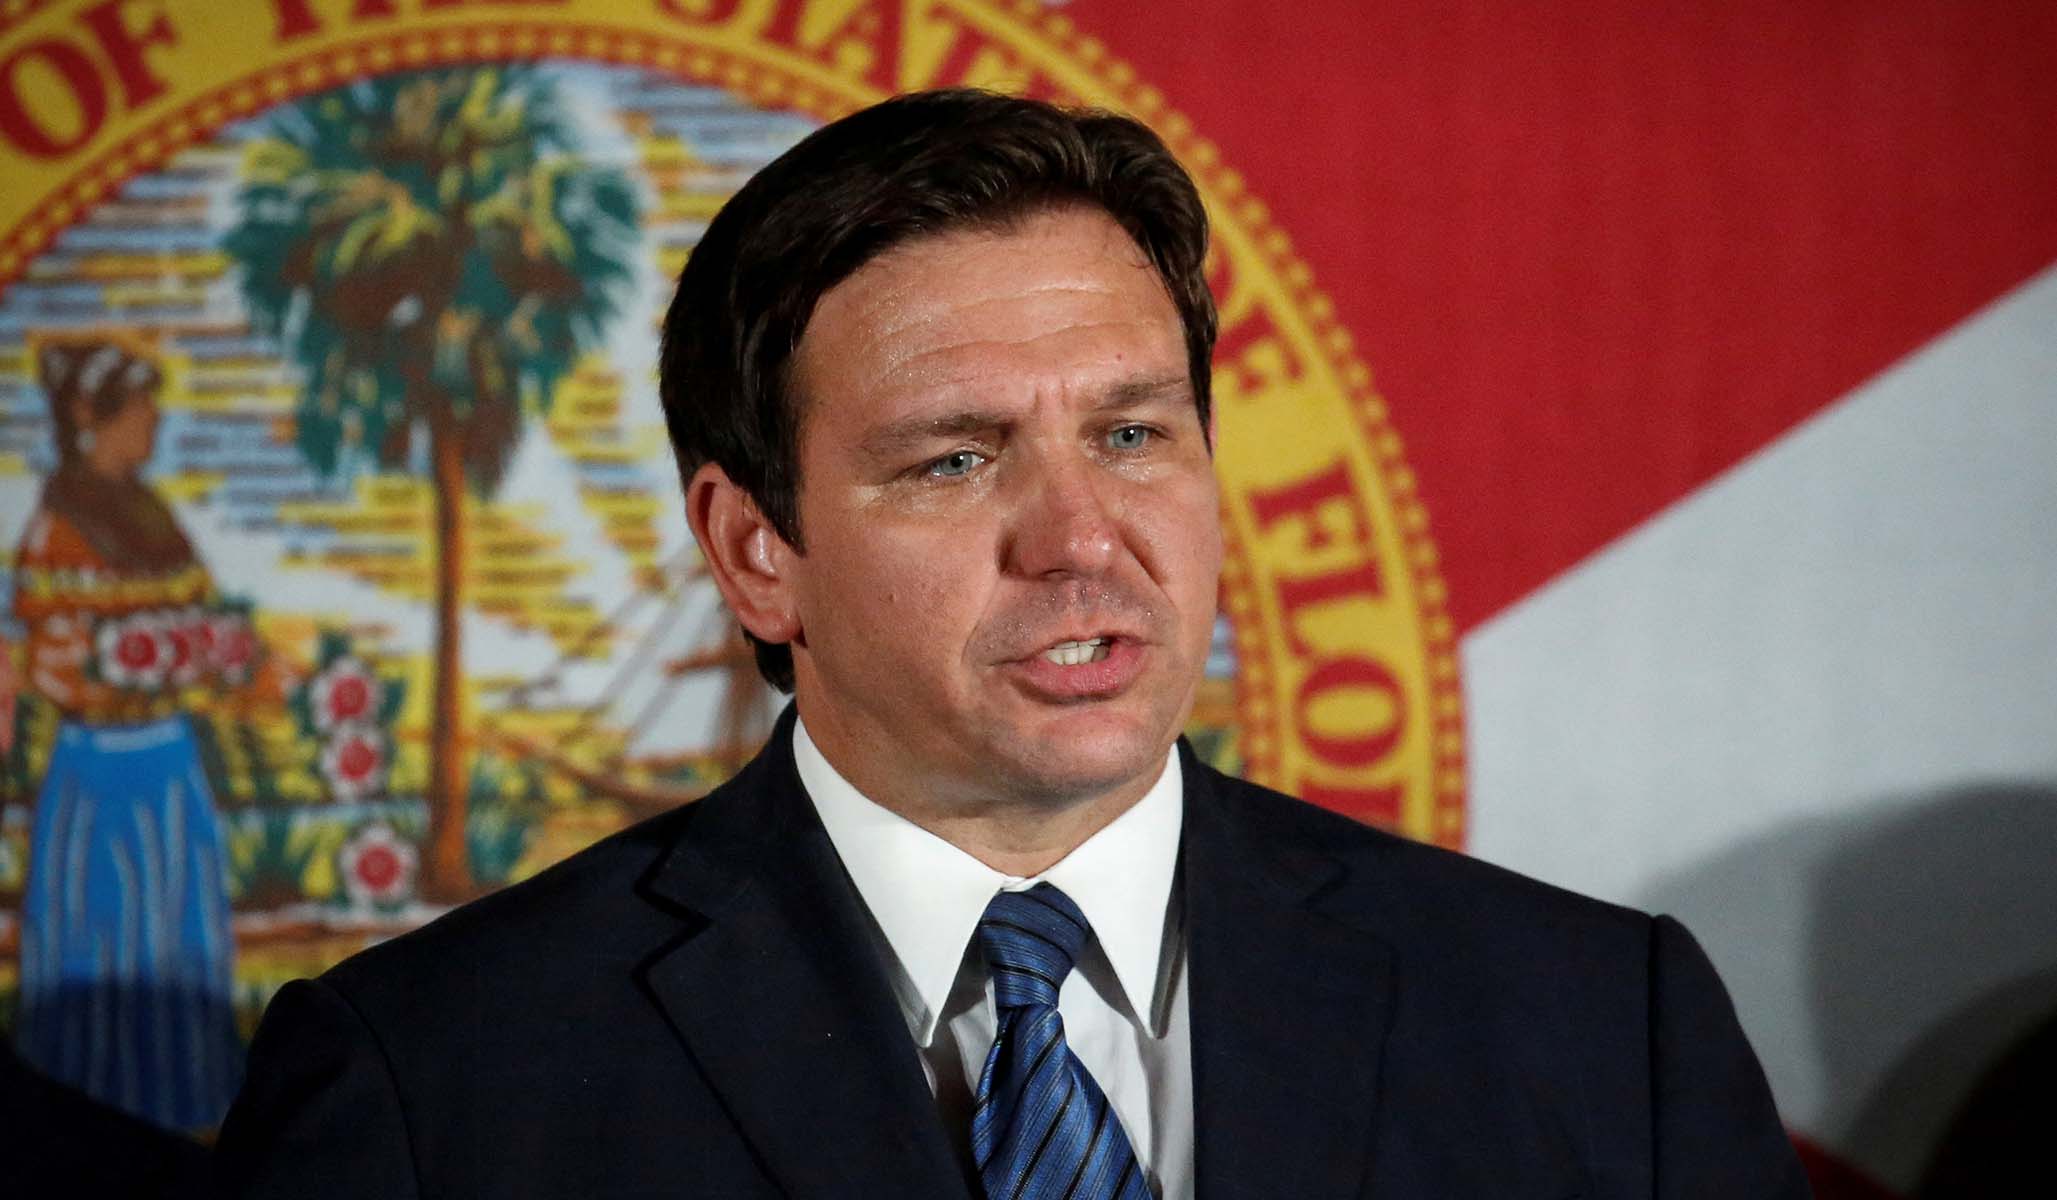 Ron DeSantis’s Candidacy Is Not Cursed Because He Is a ‘Florida Man’